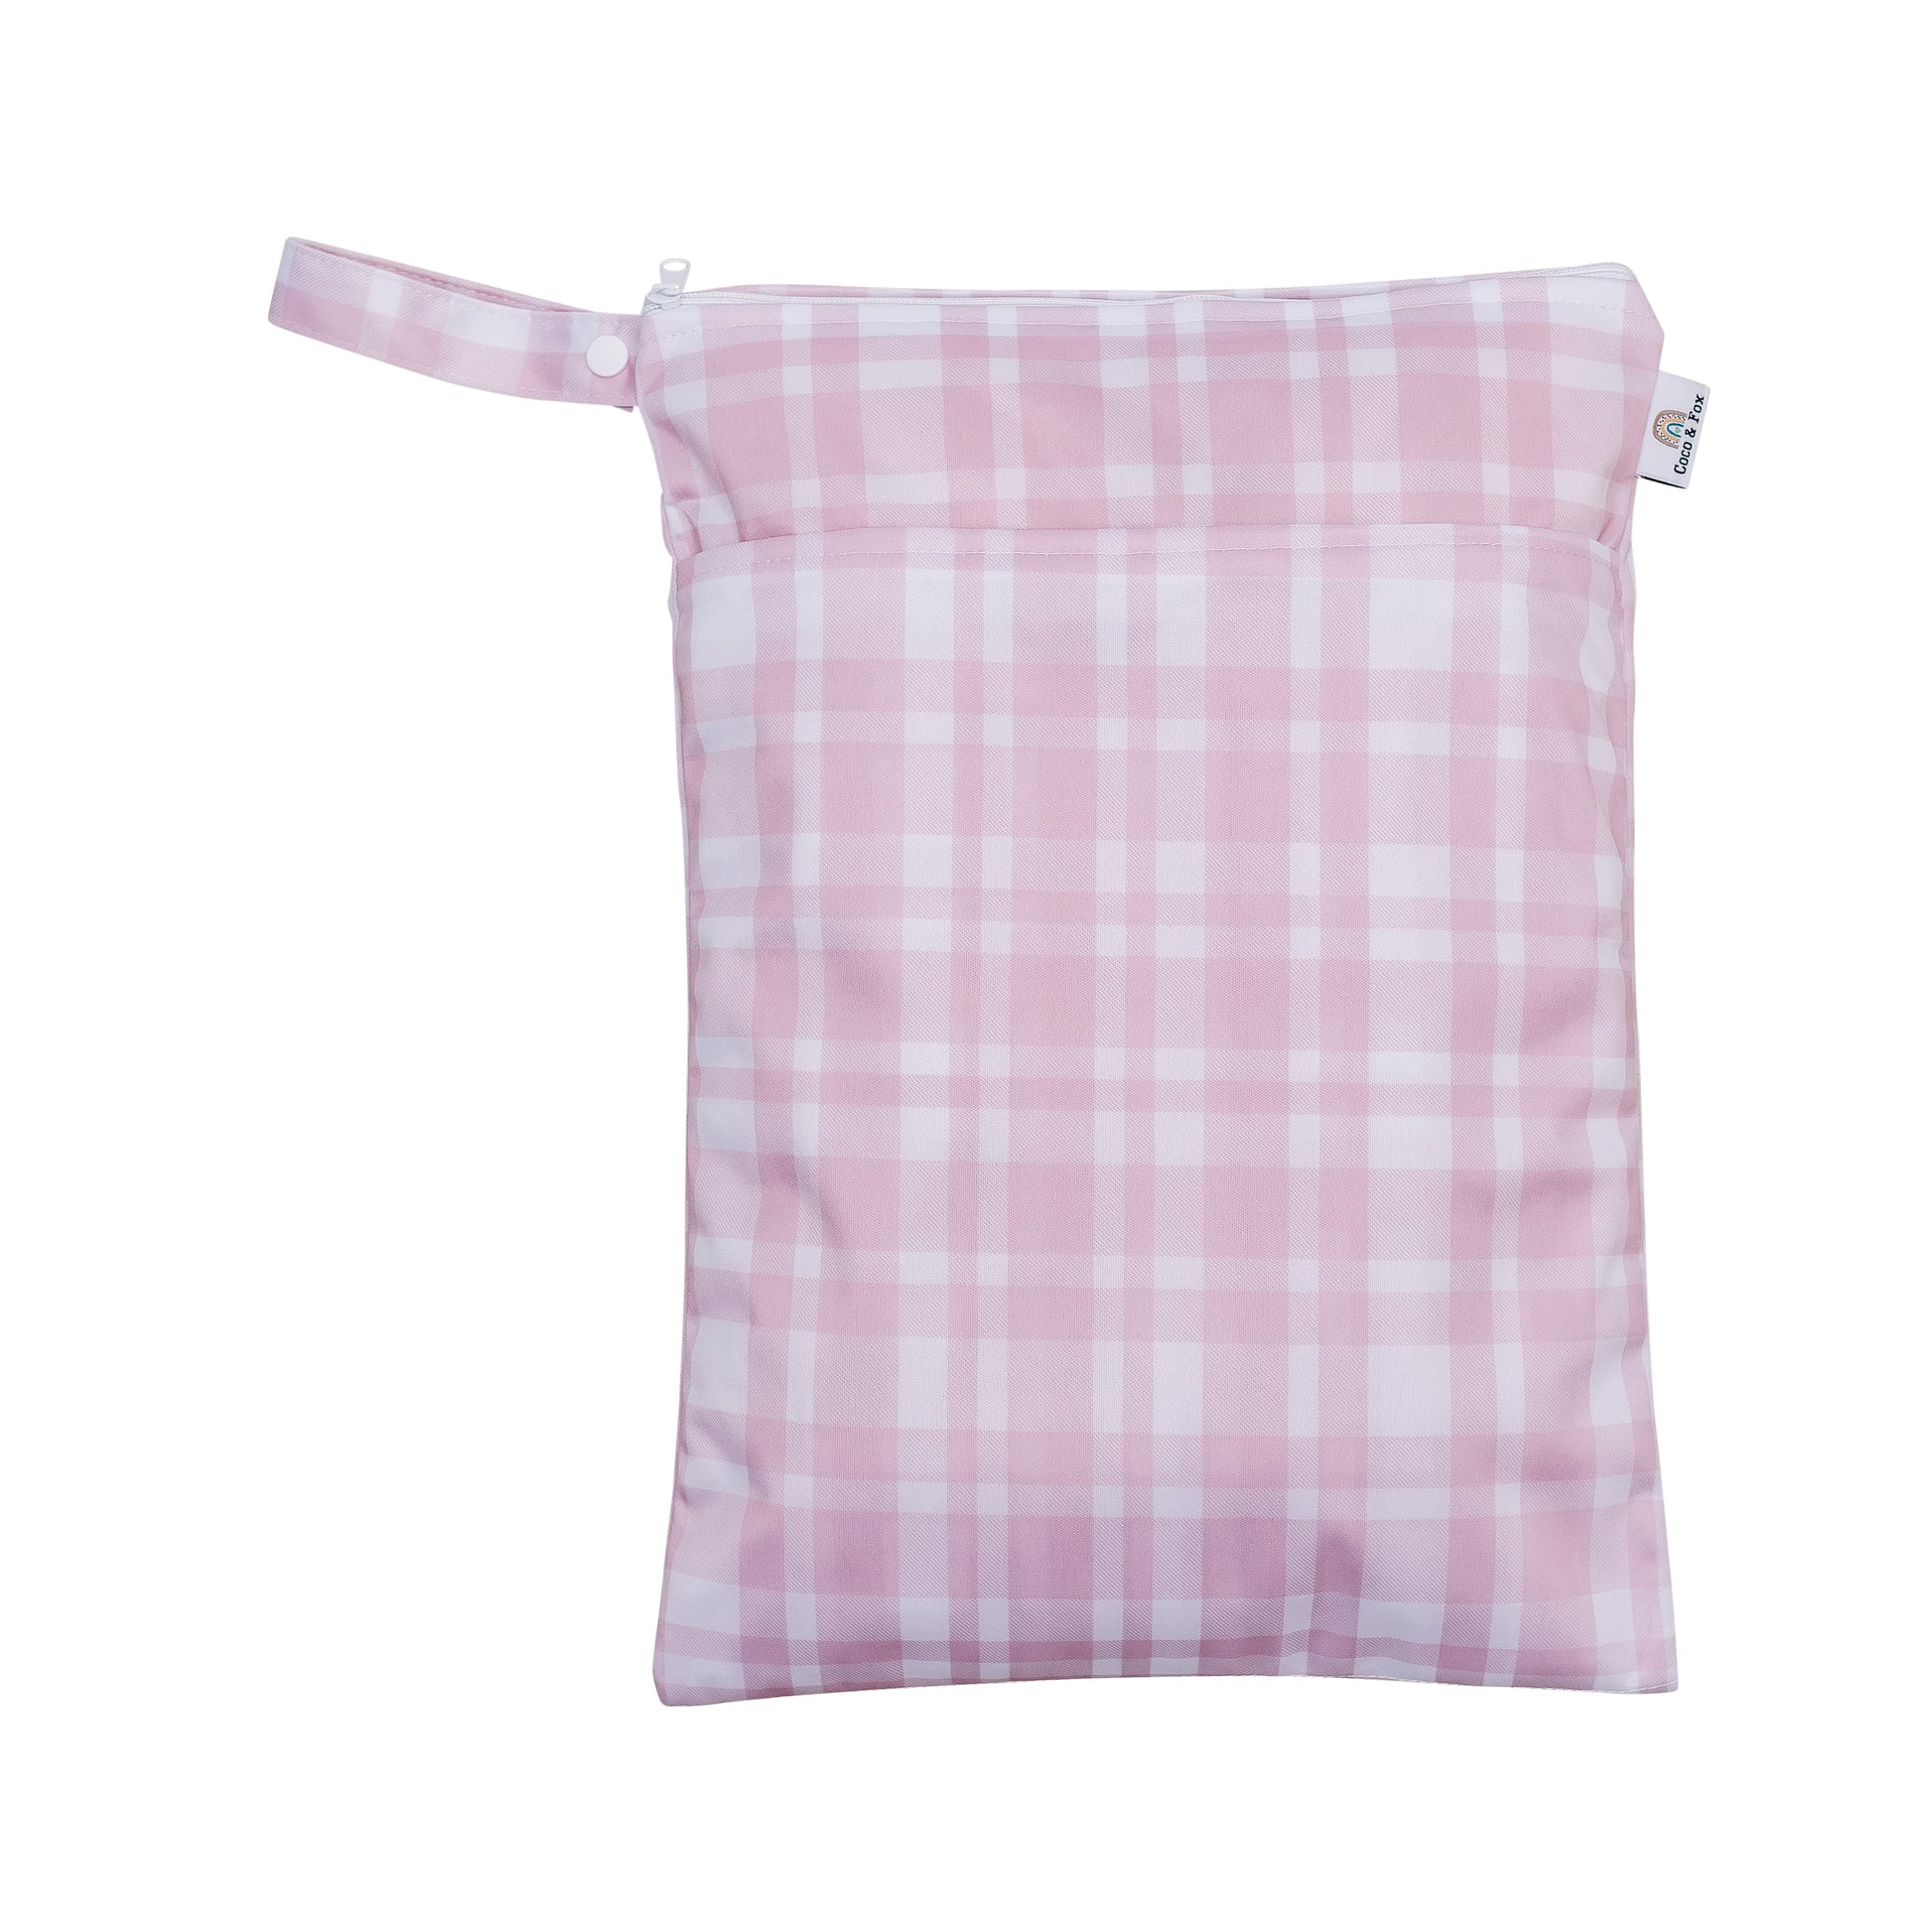 Lightweight water-resistant wet bag.  Featuring two zip pockets to separate wet and dry items, with a snap handle to attach to your pram or store in your everyday baby bag. This bag is white and pale pink gingham pattern.     